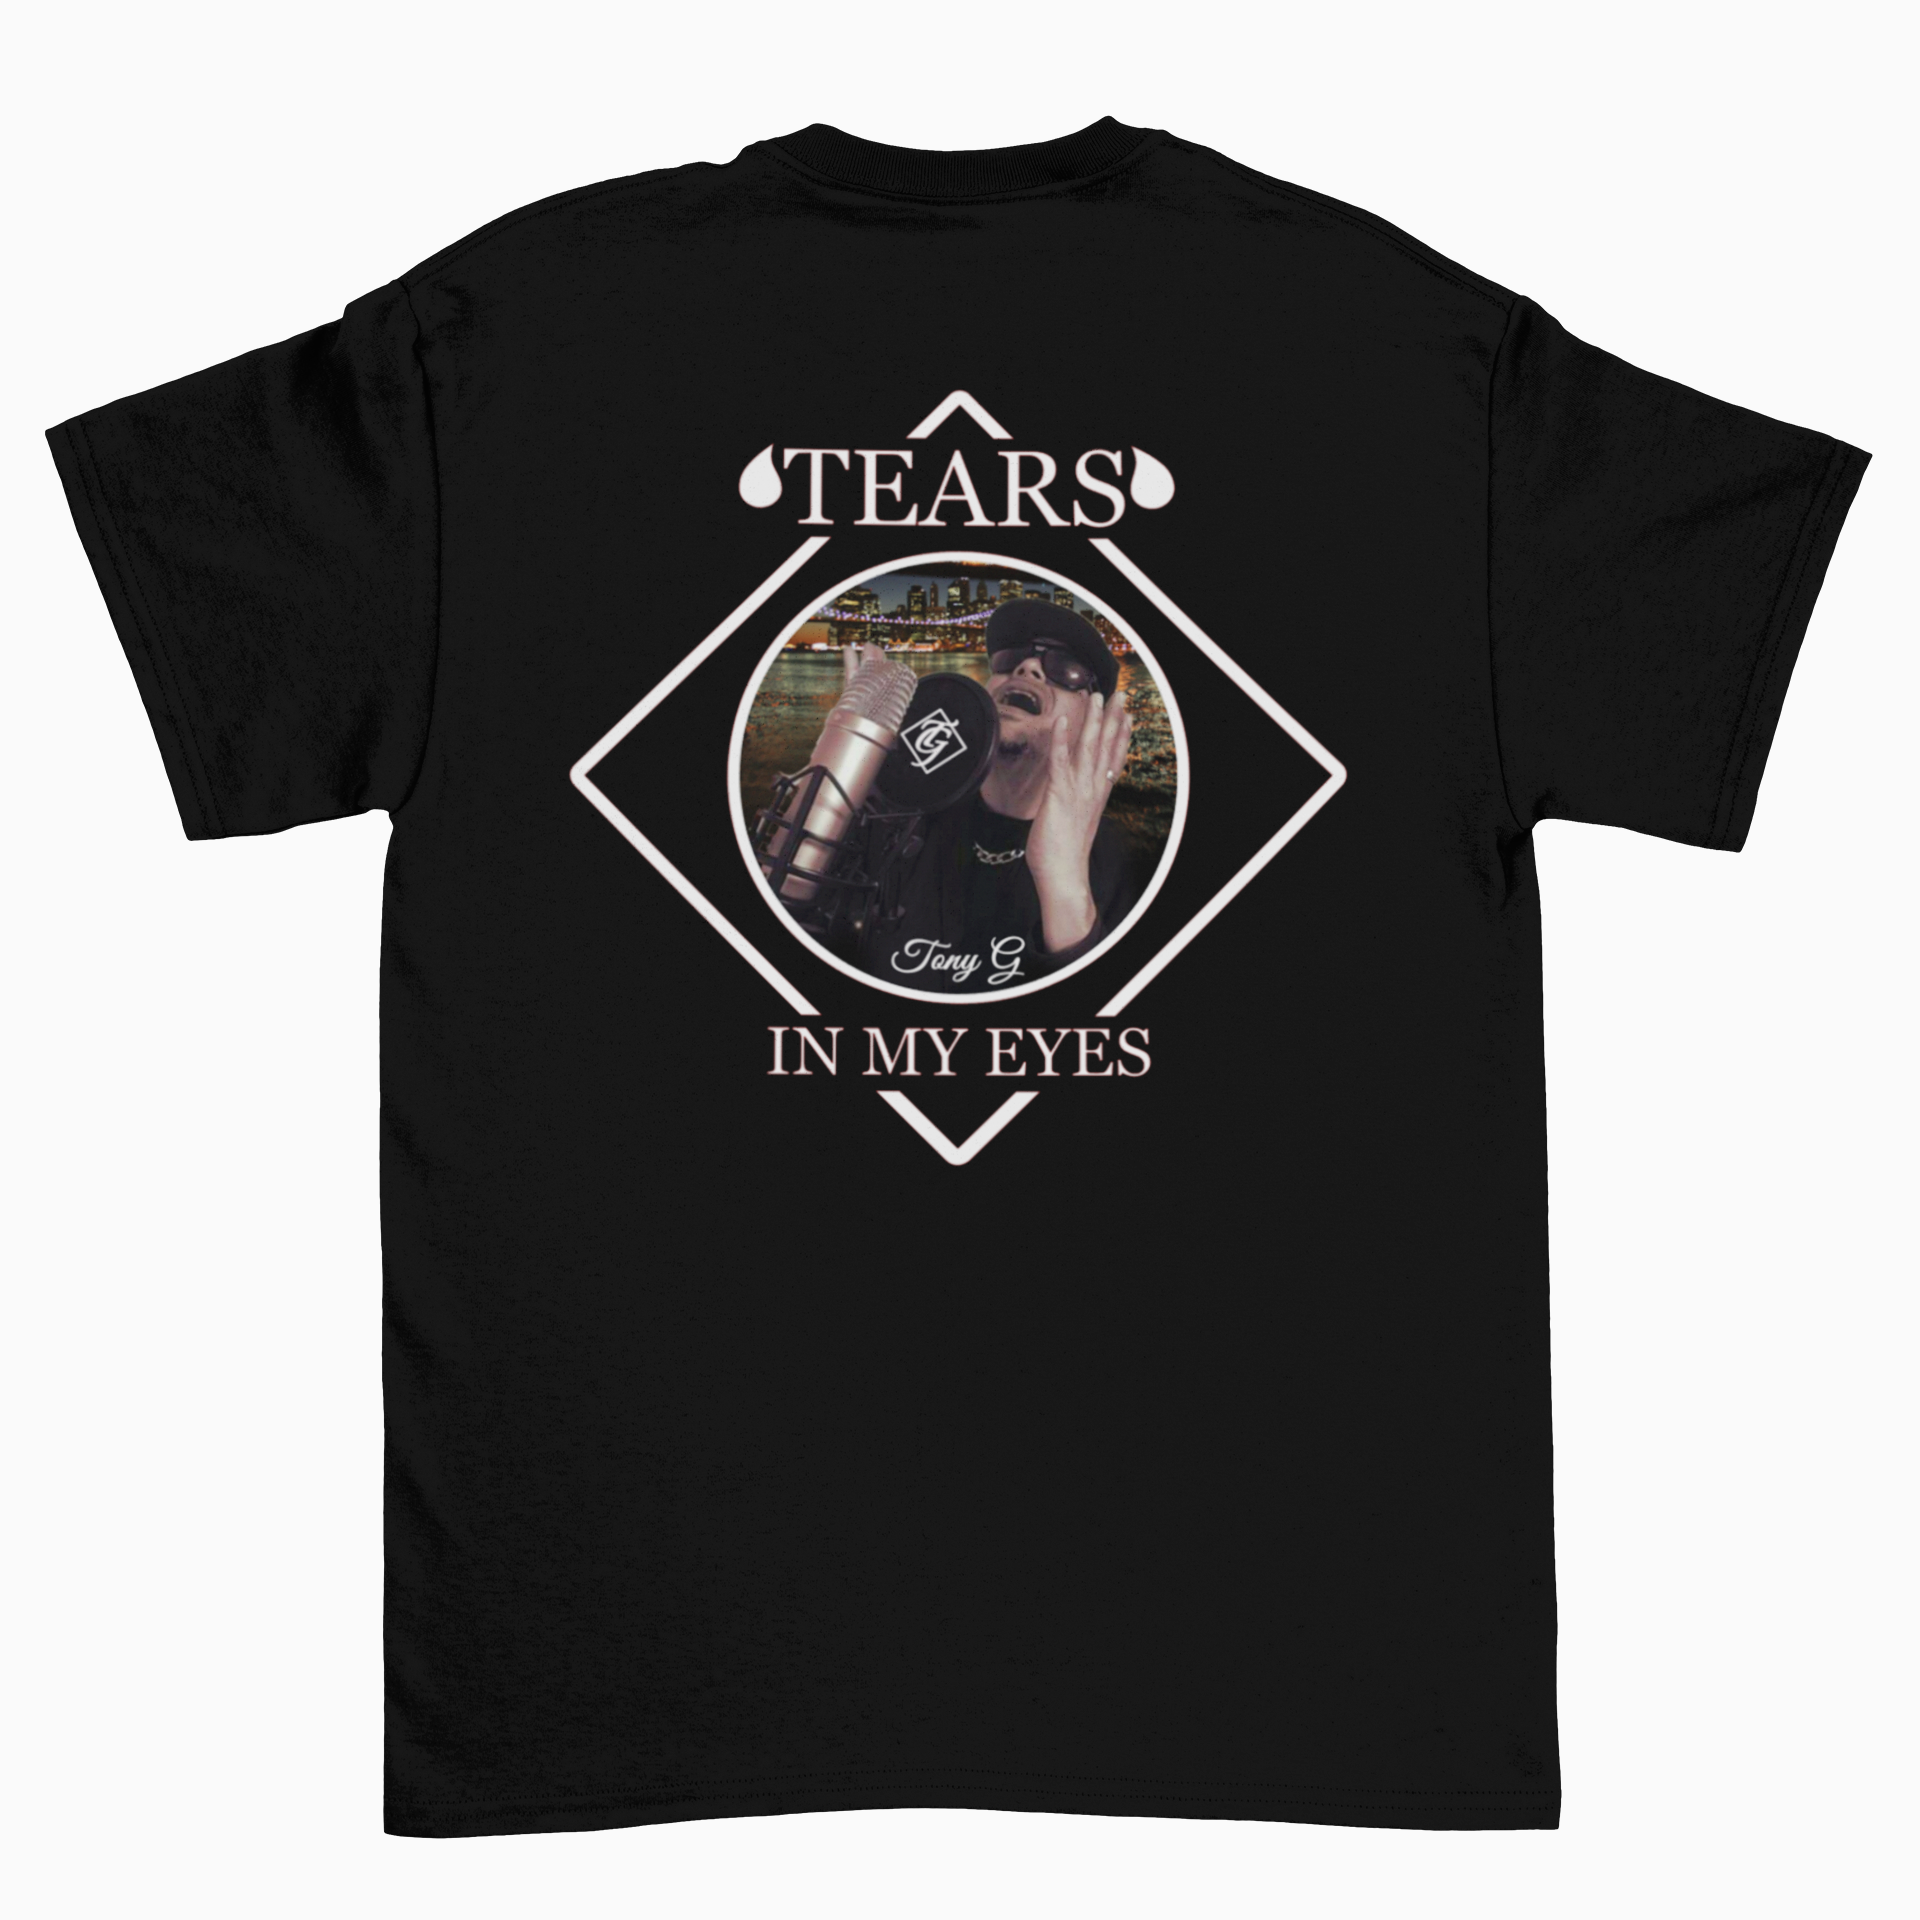 Limited Edition Tears in my eyes Tony G Shirt. - Drop Top Teez